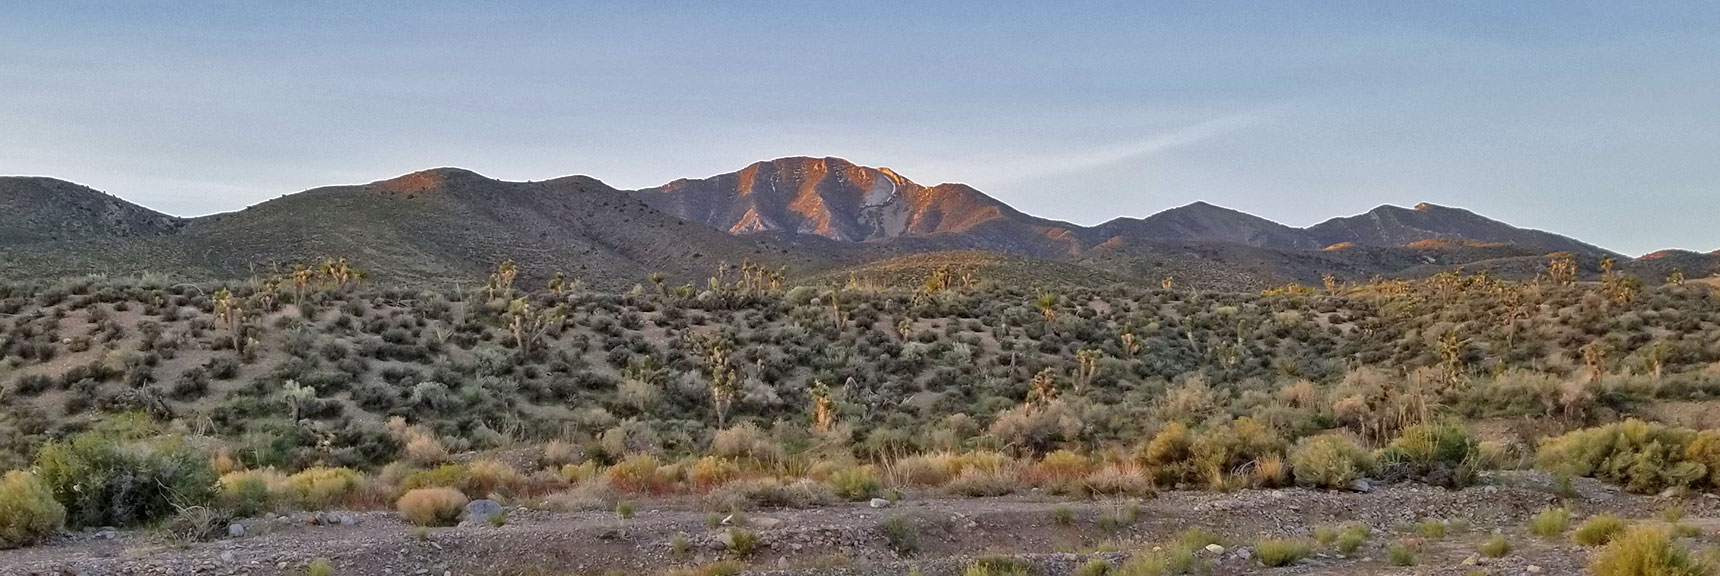 View from Kyle Canyon Road, La Madre Mountain Nevada Northern Approach and High Points